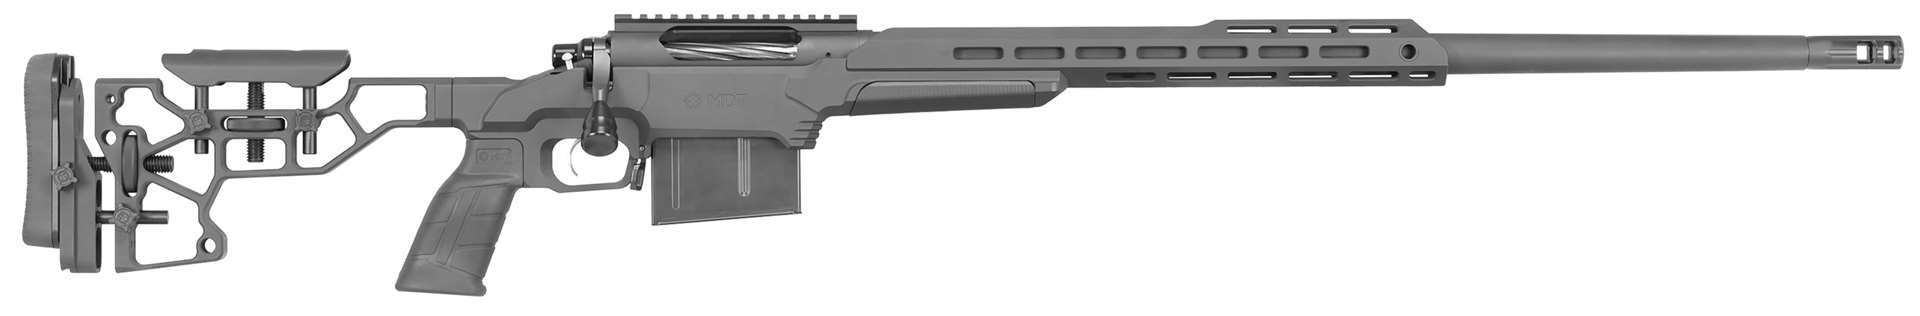 XM24 Tactical bolt-action rifle side view